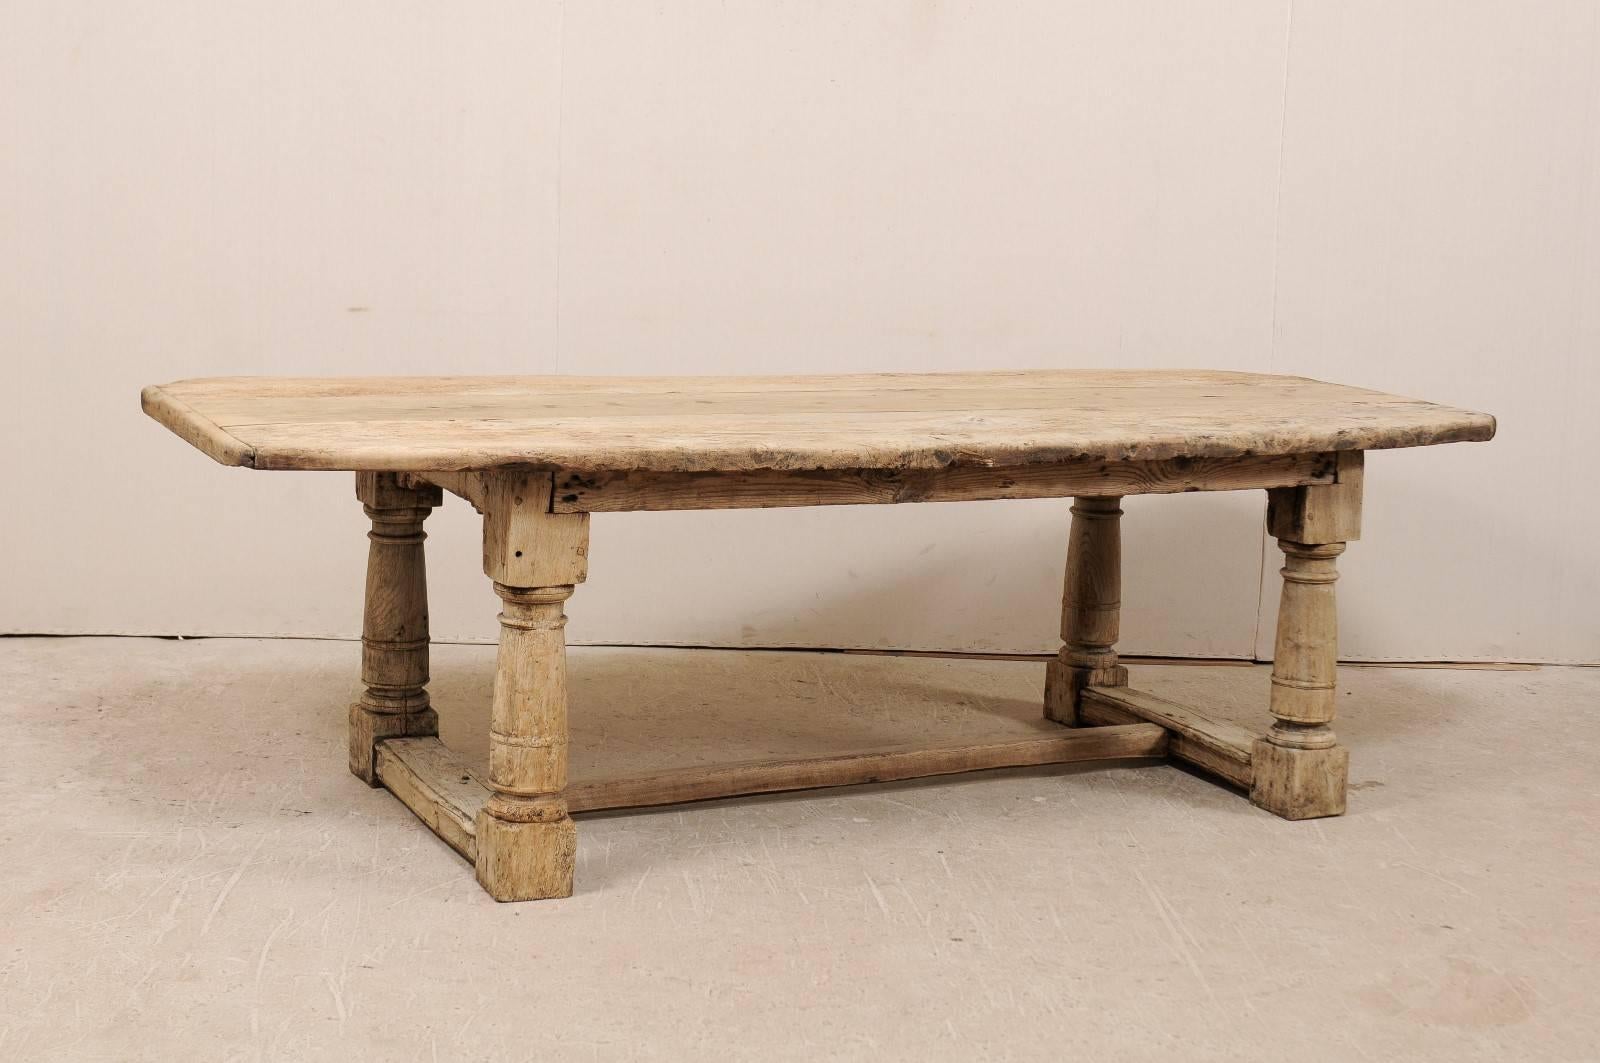 An early 18th century Italian dining table. This Italian dining table from the early 18th century (or quite possibly 17th century) is beautifully rustic with the thick slab top and stout legs. The table is bleached oak with a lovely aged wood top,